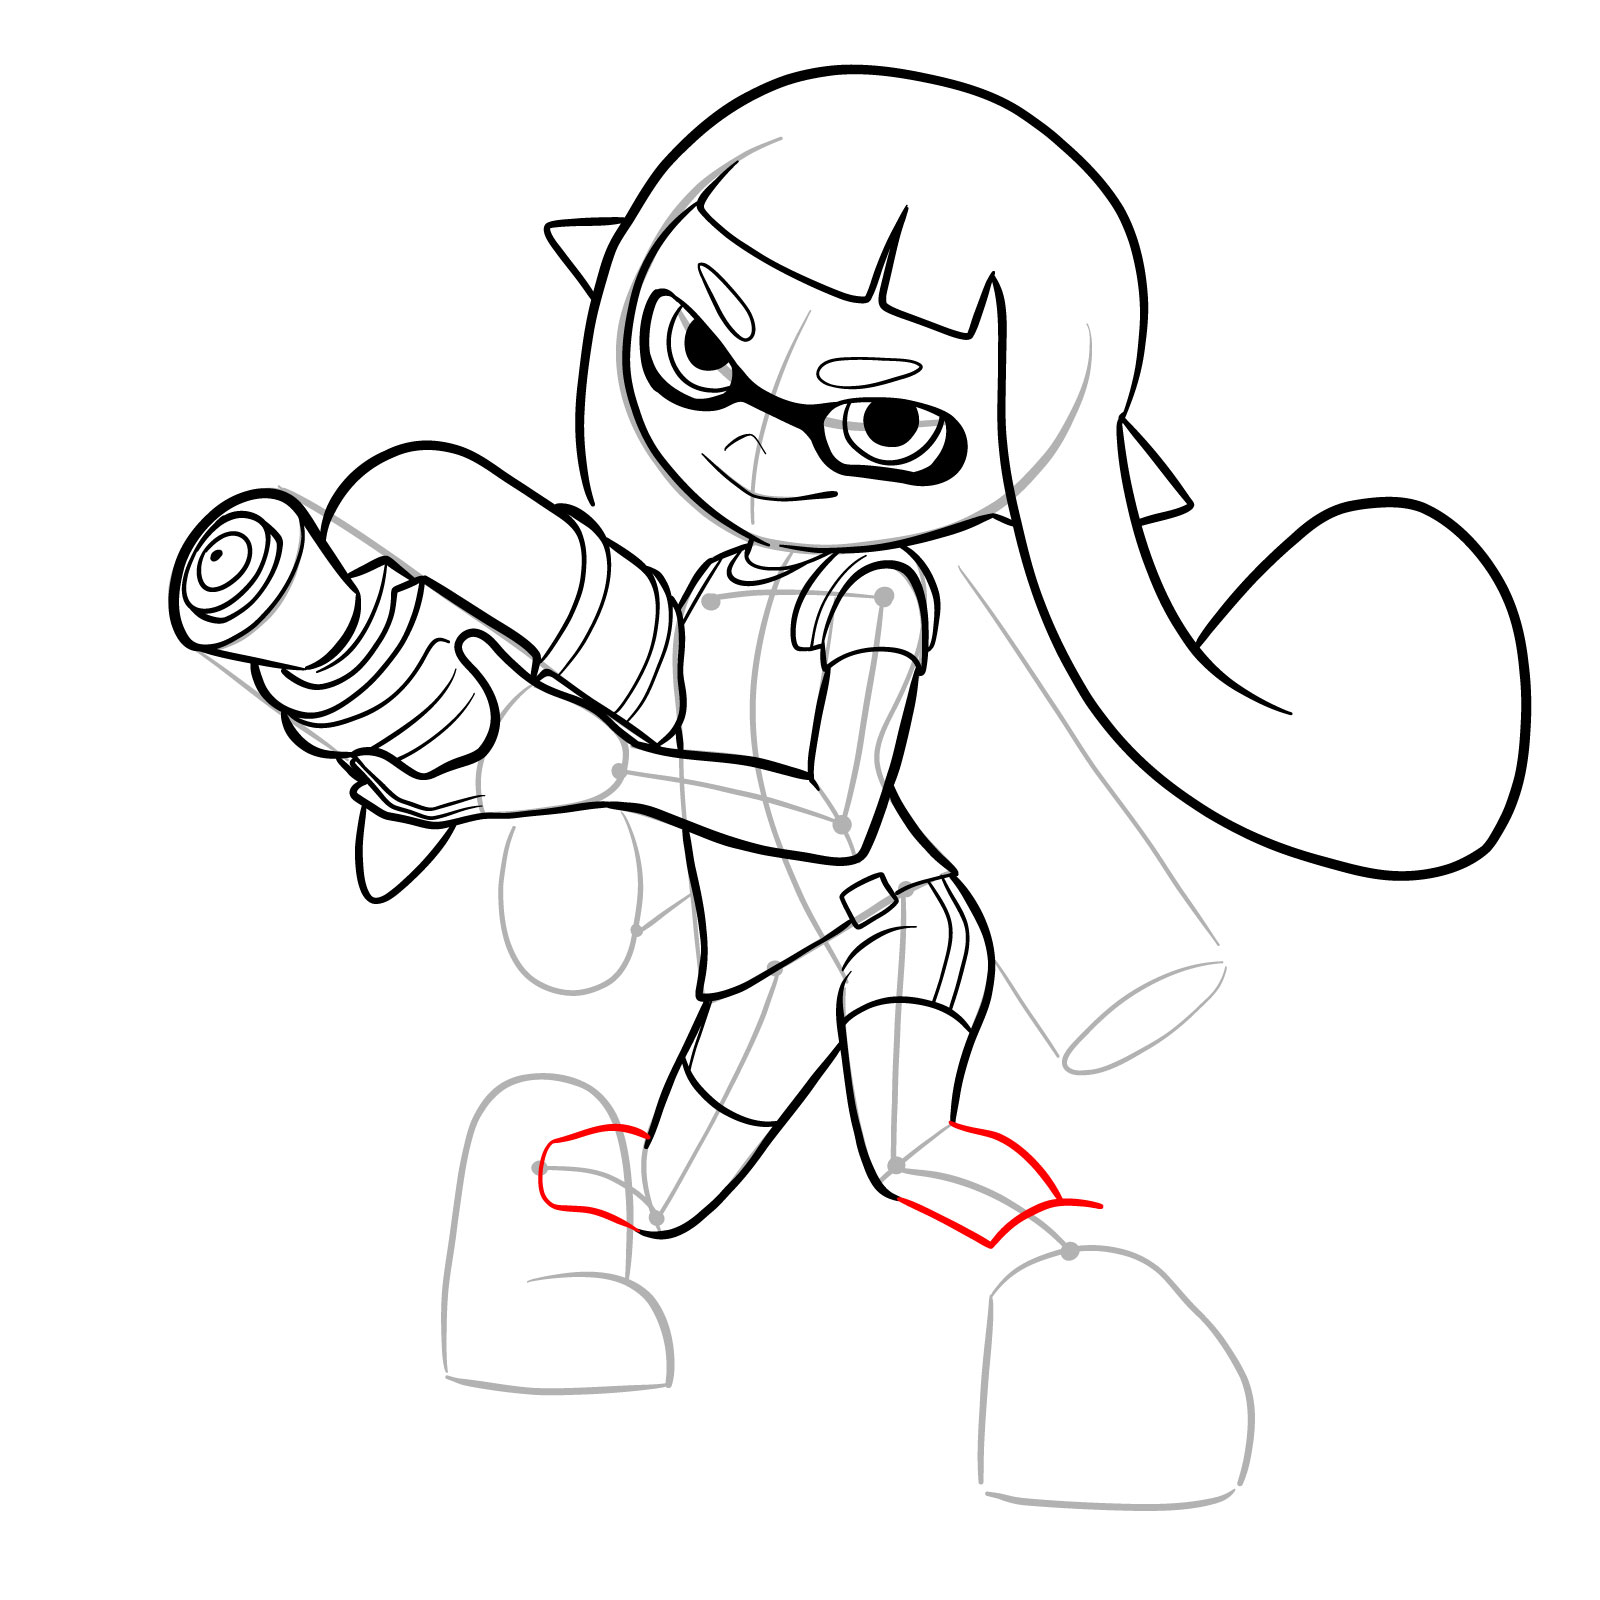 How to draw an Inkling Girl - step 24